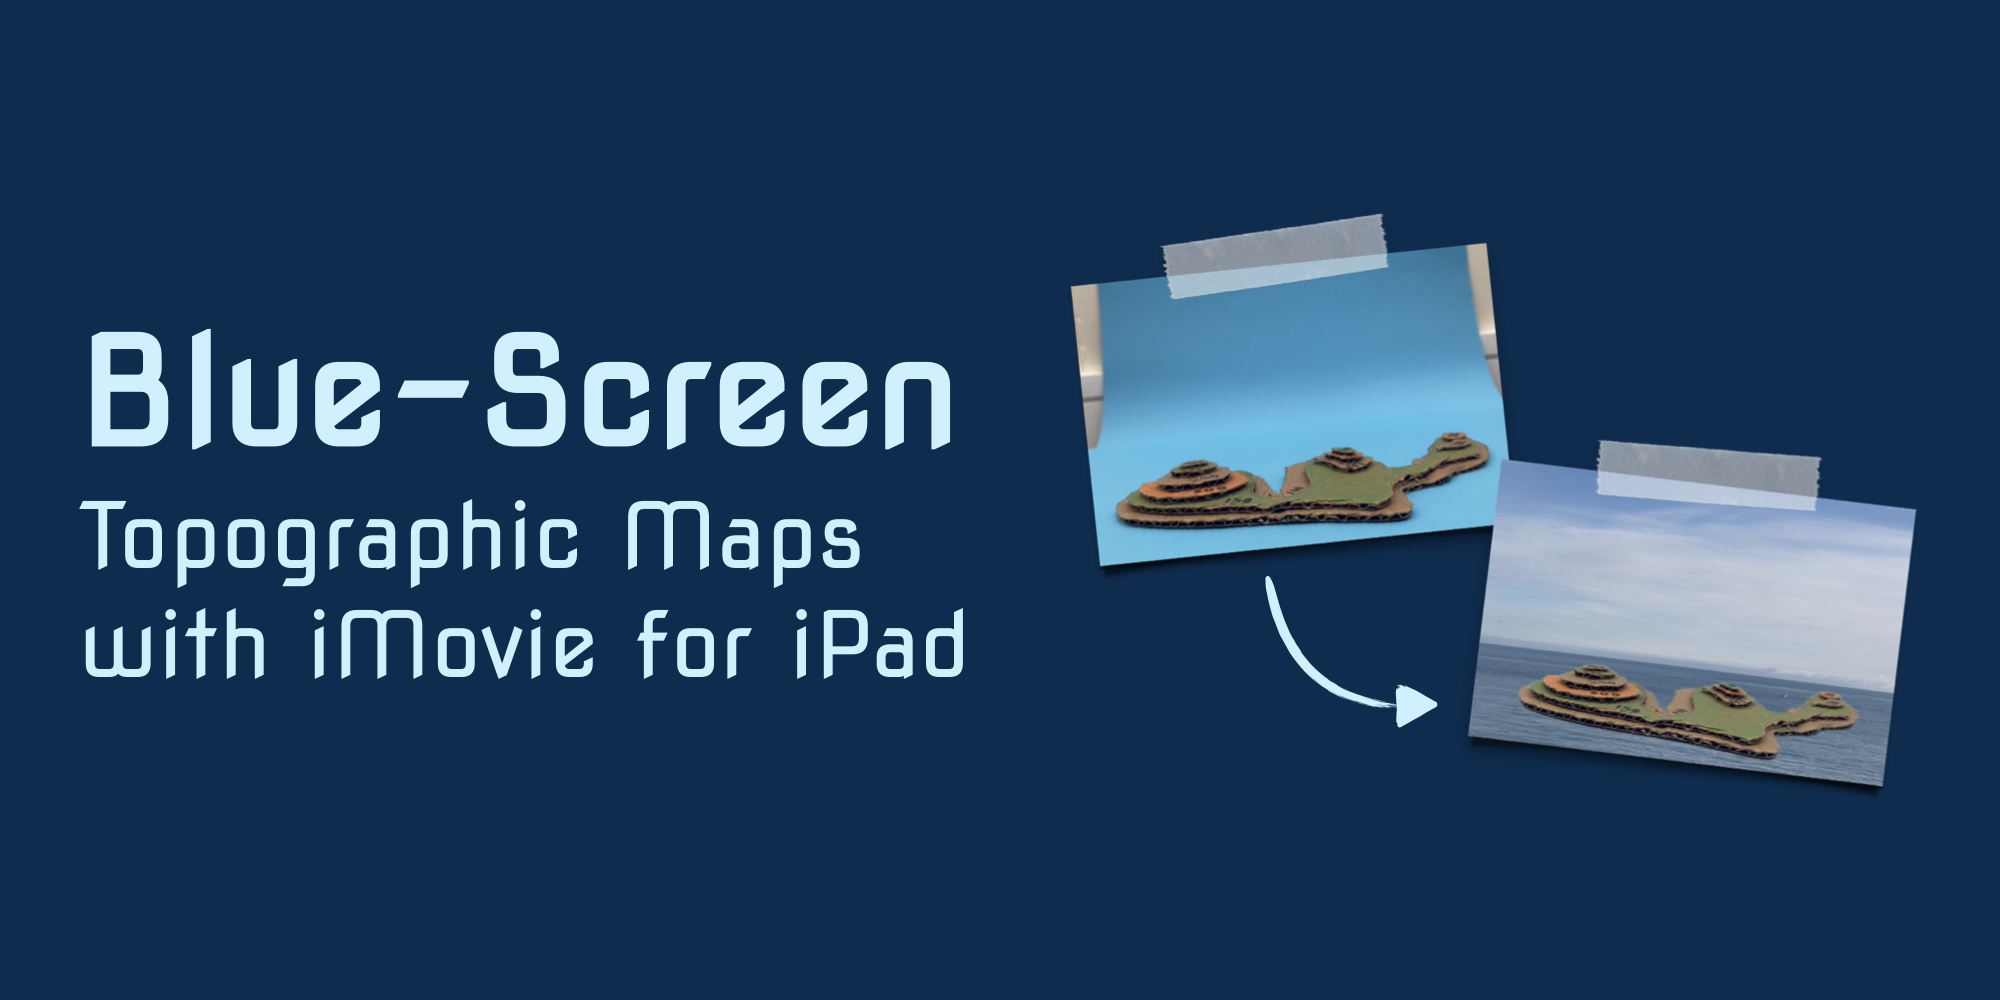 Text on left says ‘Blue-Screen Topographic Maps with iMovie for iPad’ with 2 photos on the right showing cardboard map model.